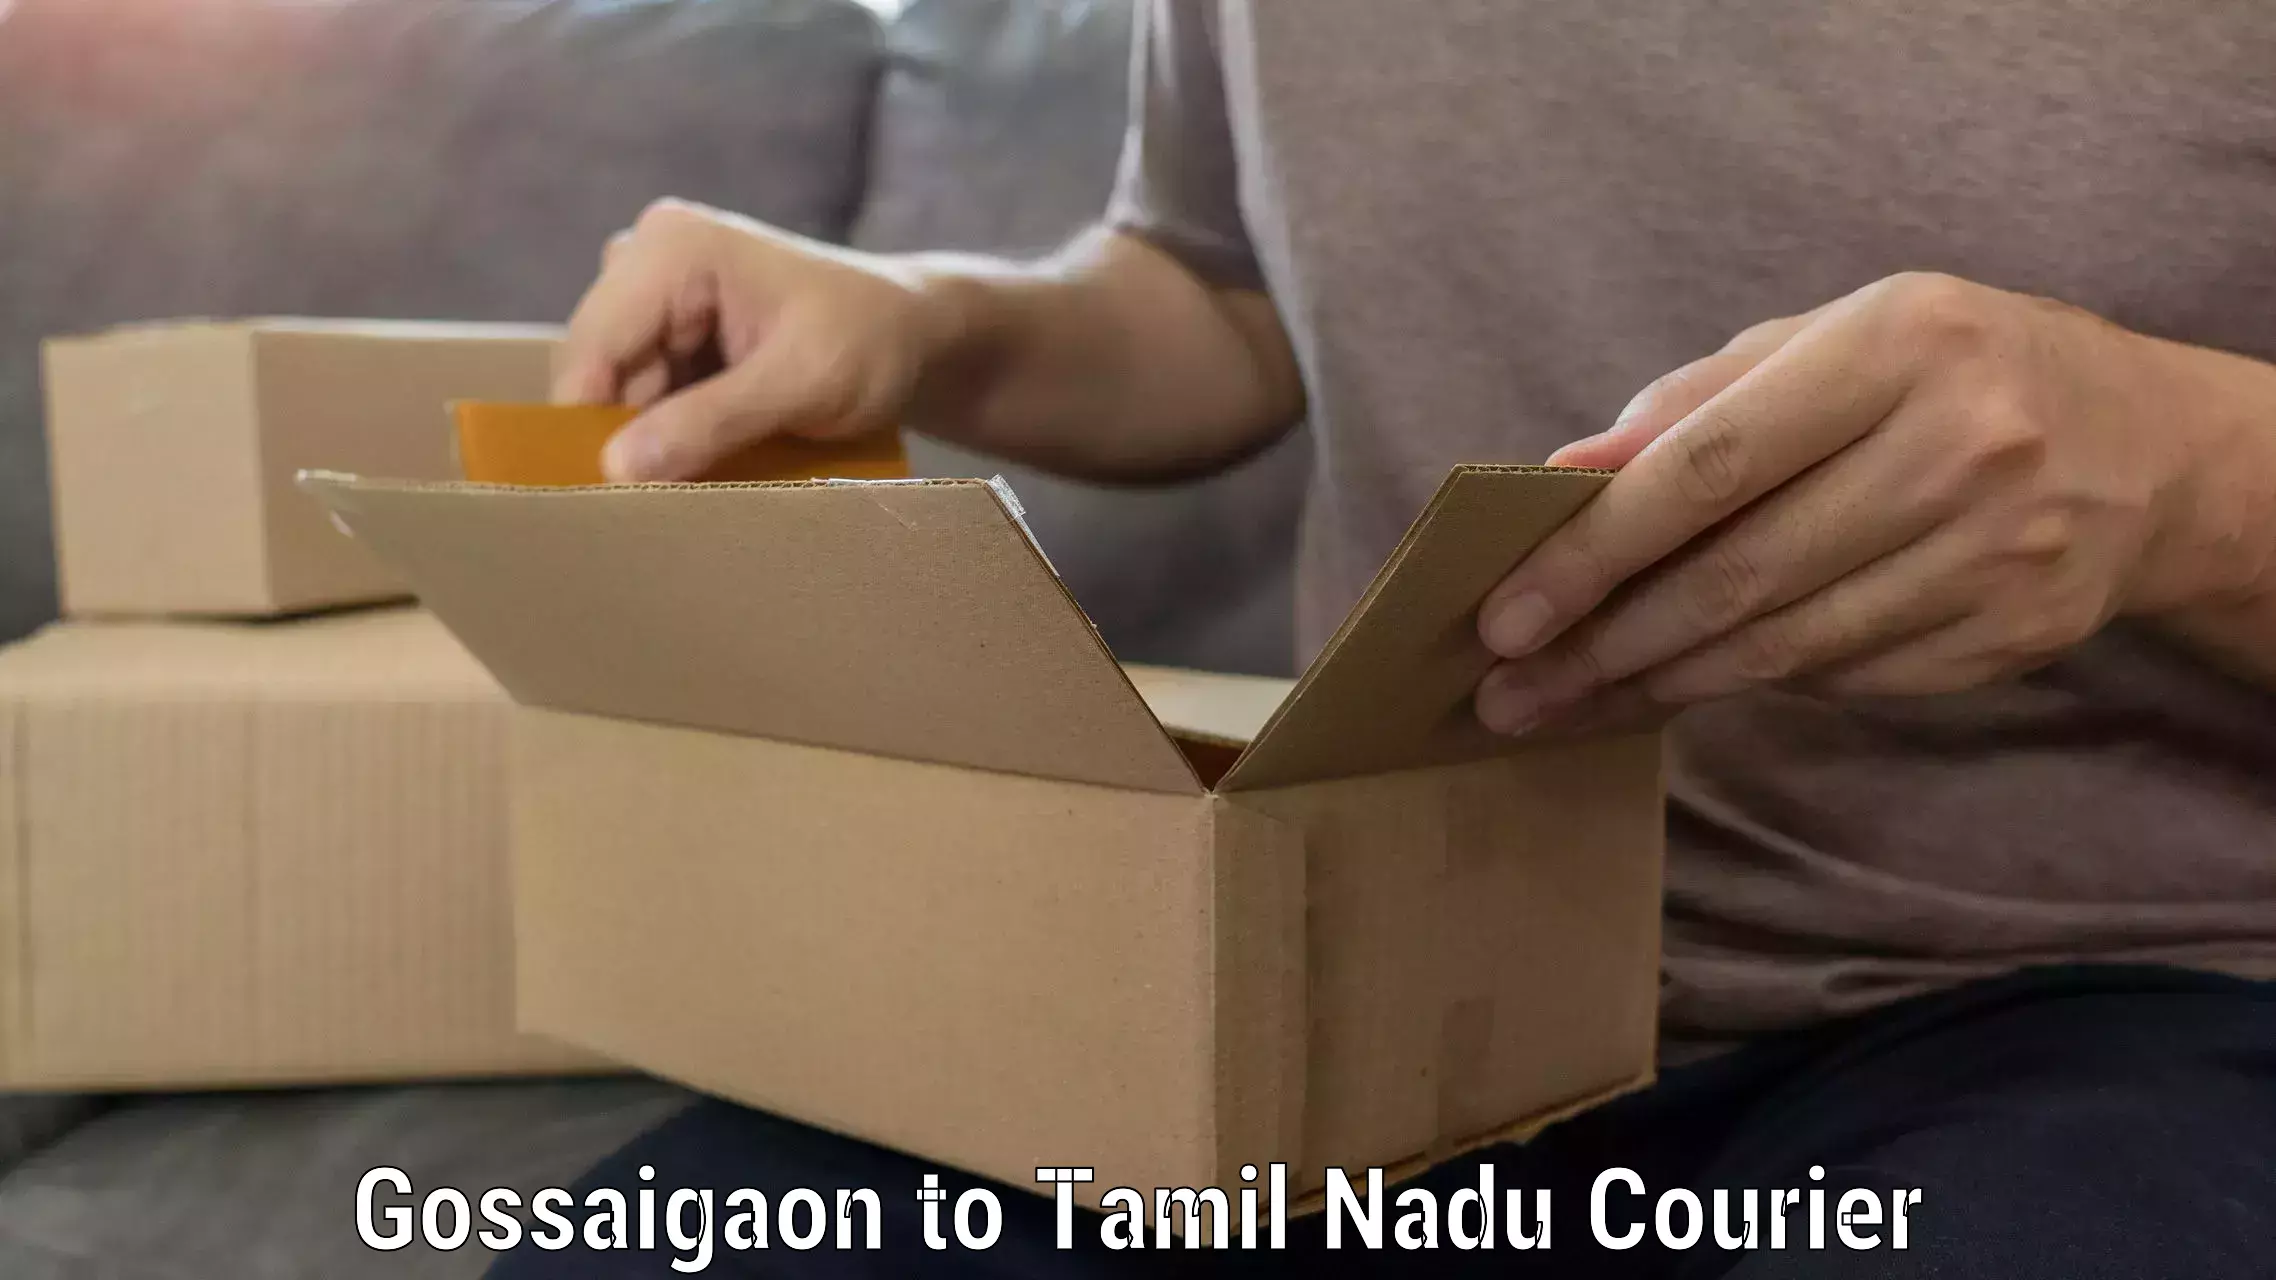 Furniture delivery service Gossaigaon to Tirupur